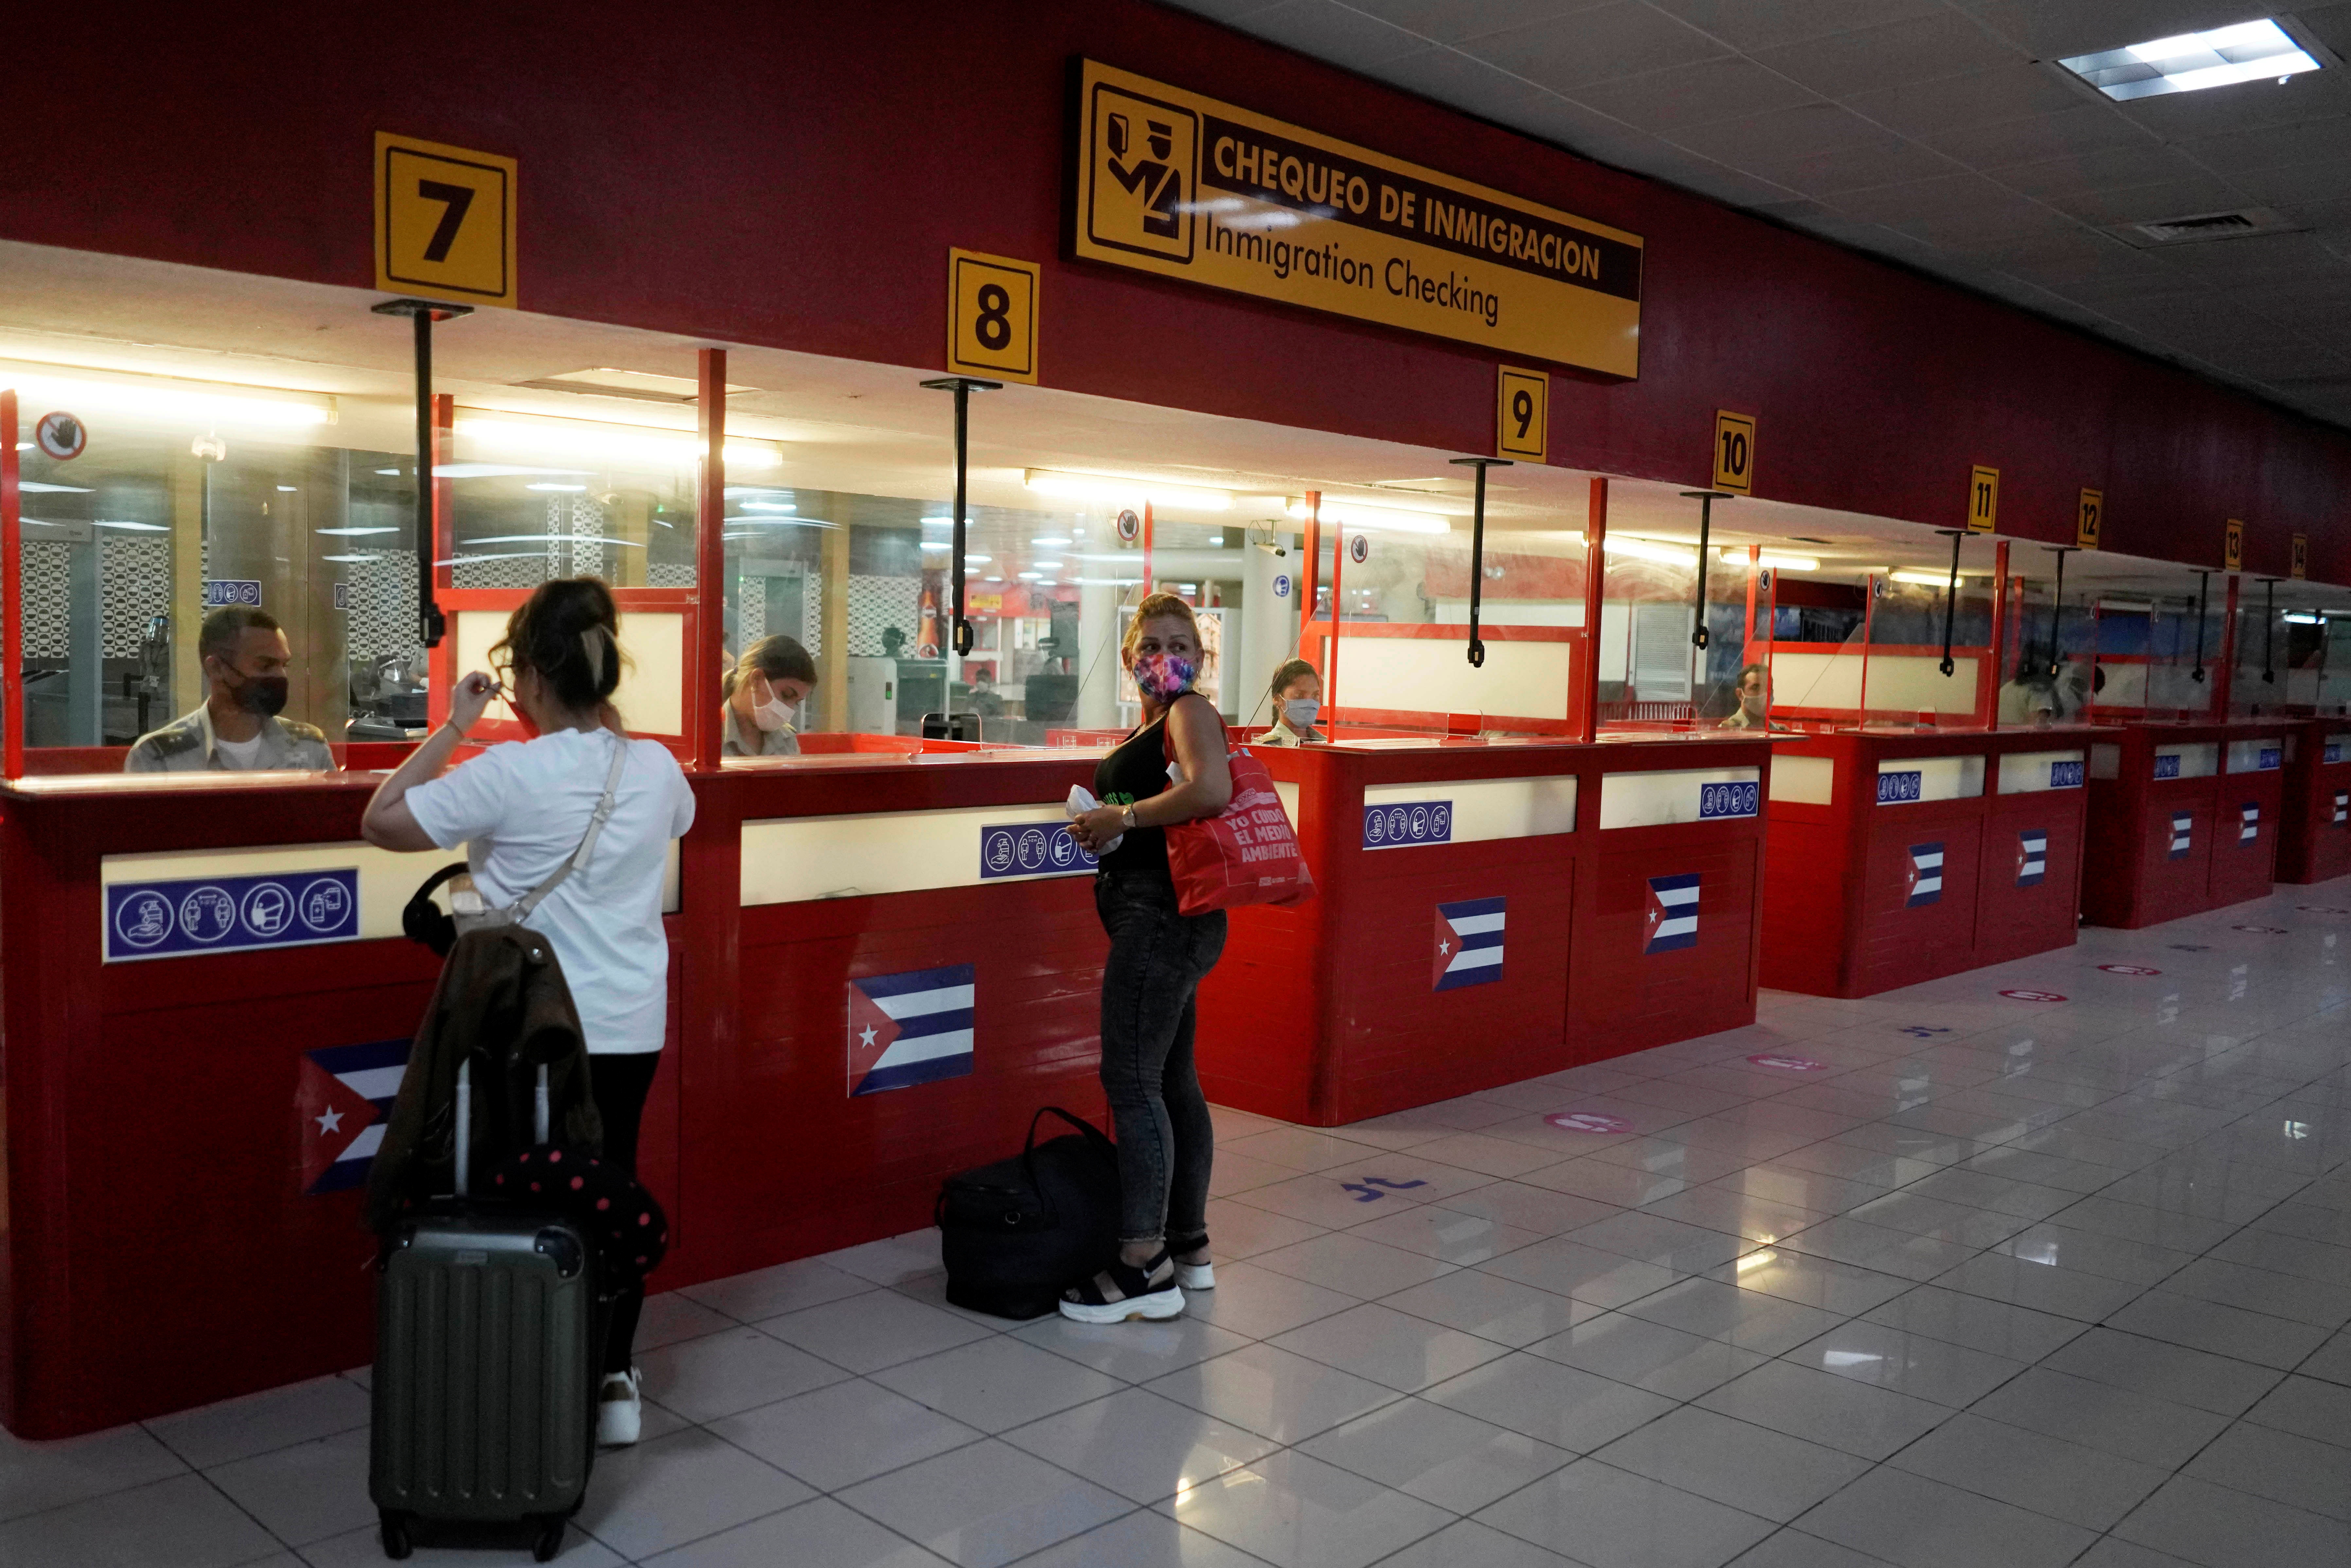 Tourists have their passports checked at the Jose Marti International Airport amid concerns about the spread of the coronavirus disease (COVID-19), in Havana, Cuba, November 15, 2020. REUTERS/Alexandre Meneghini